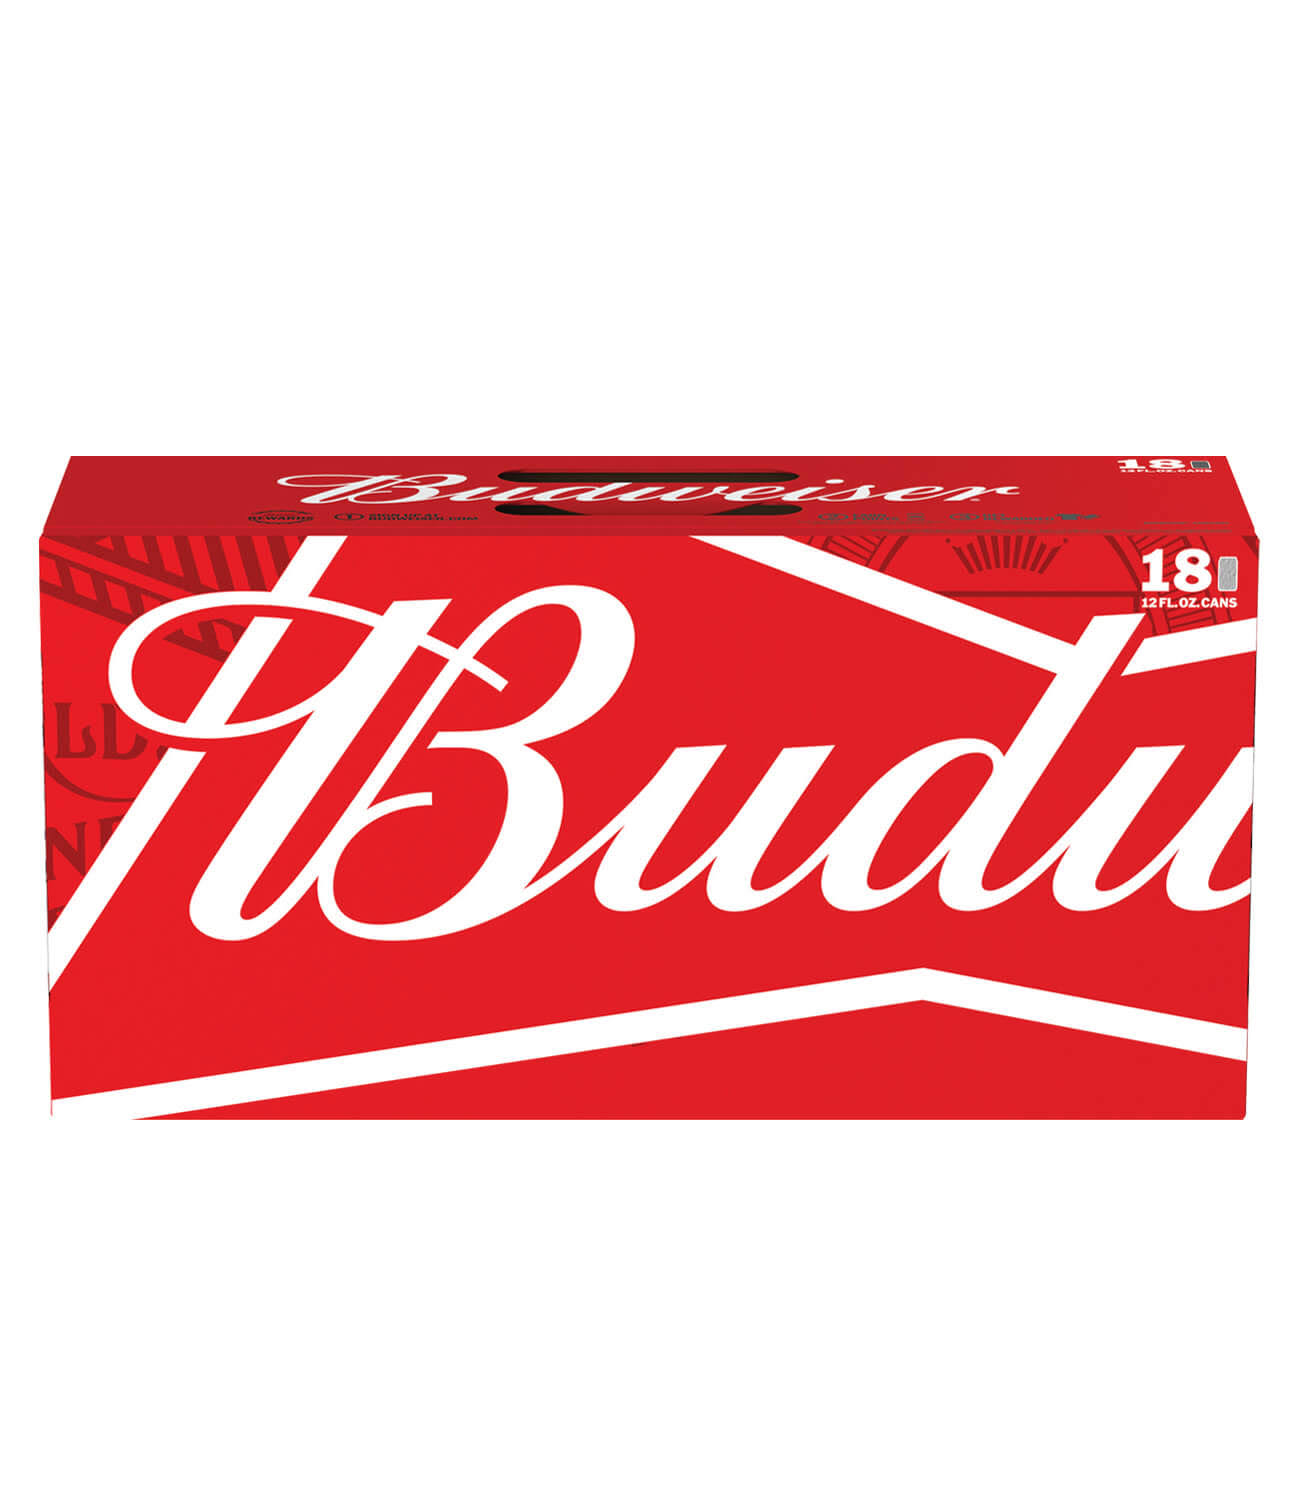 Budweiser American Lager - 18 Cans